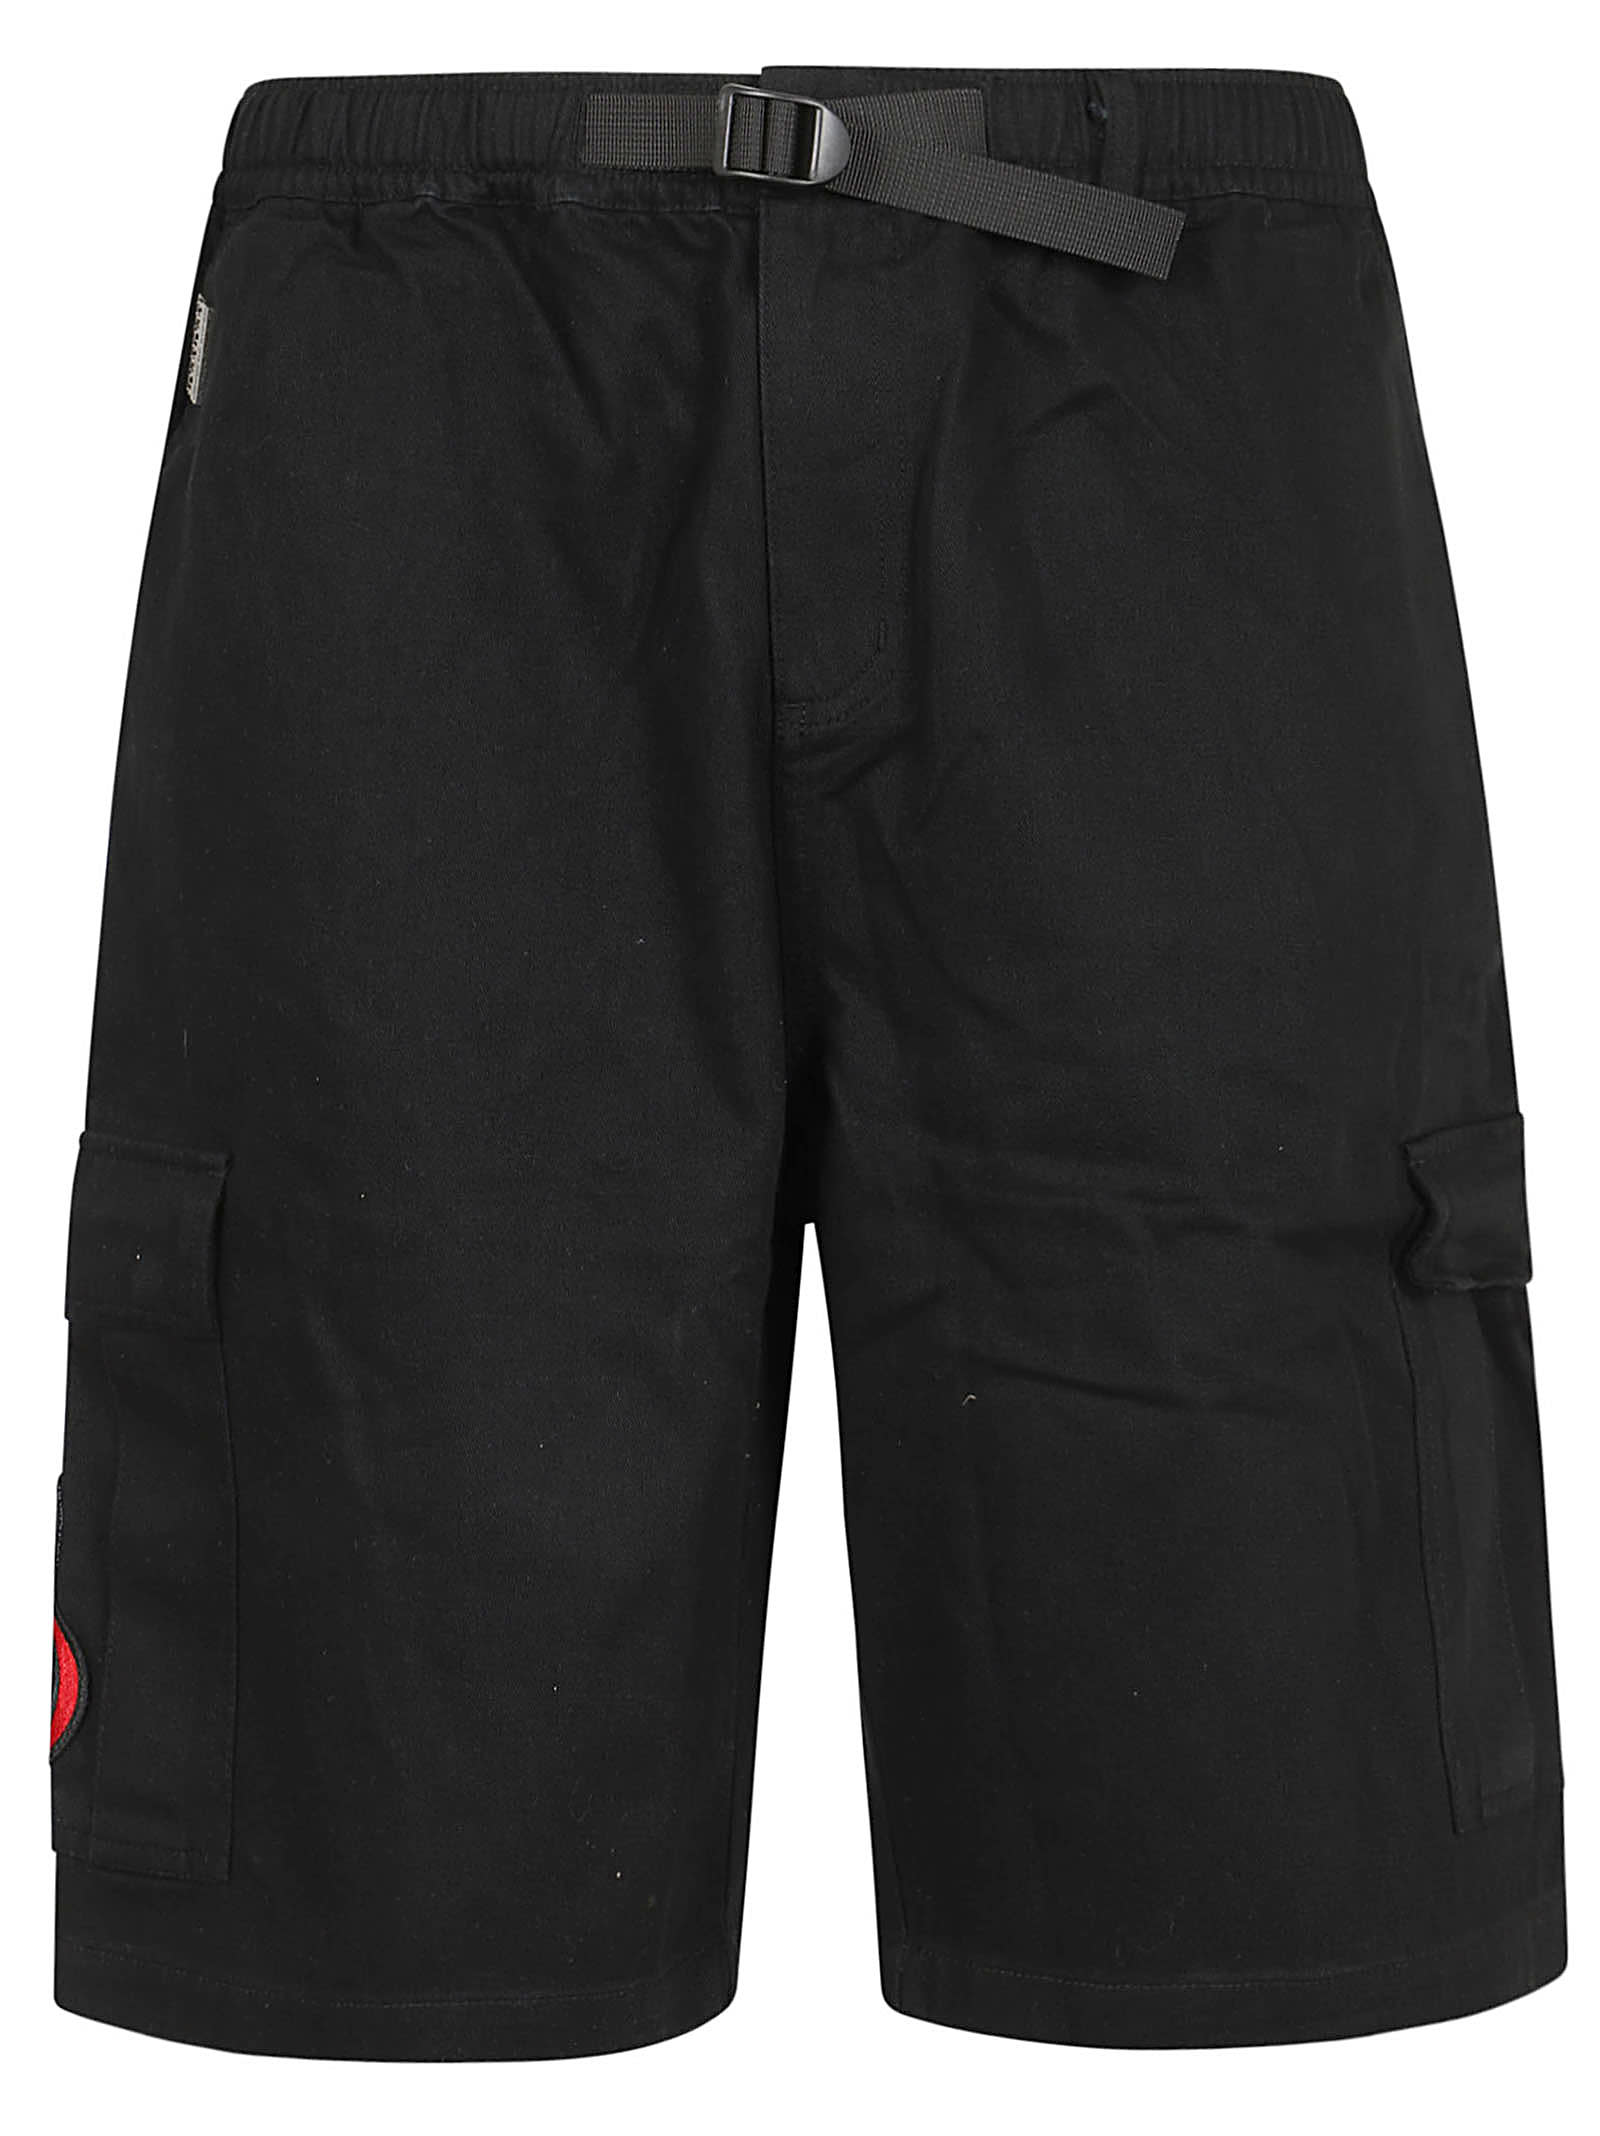 Black Cargo Shorts With Flames Patch And Printed Logo